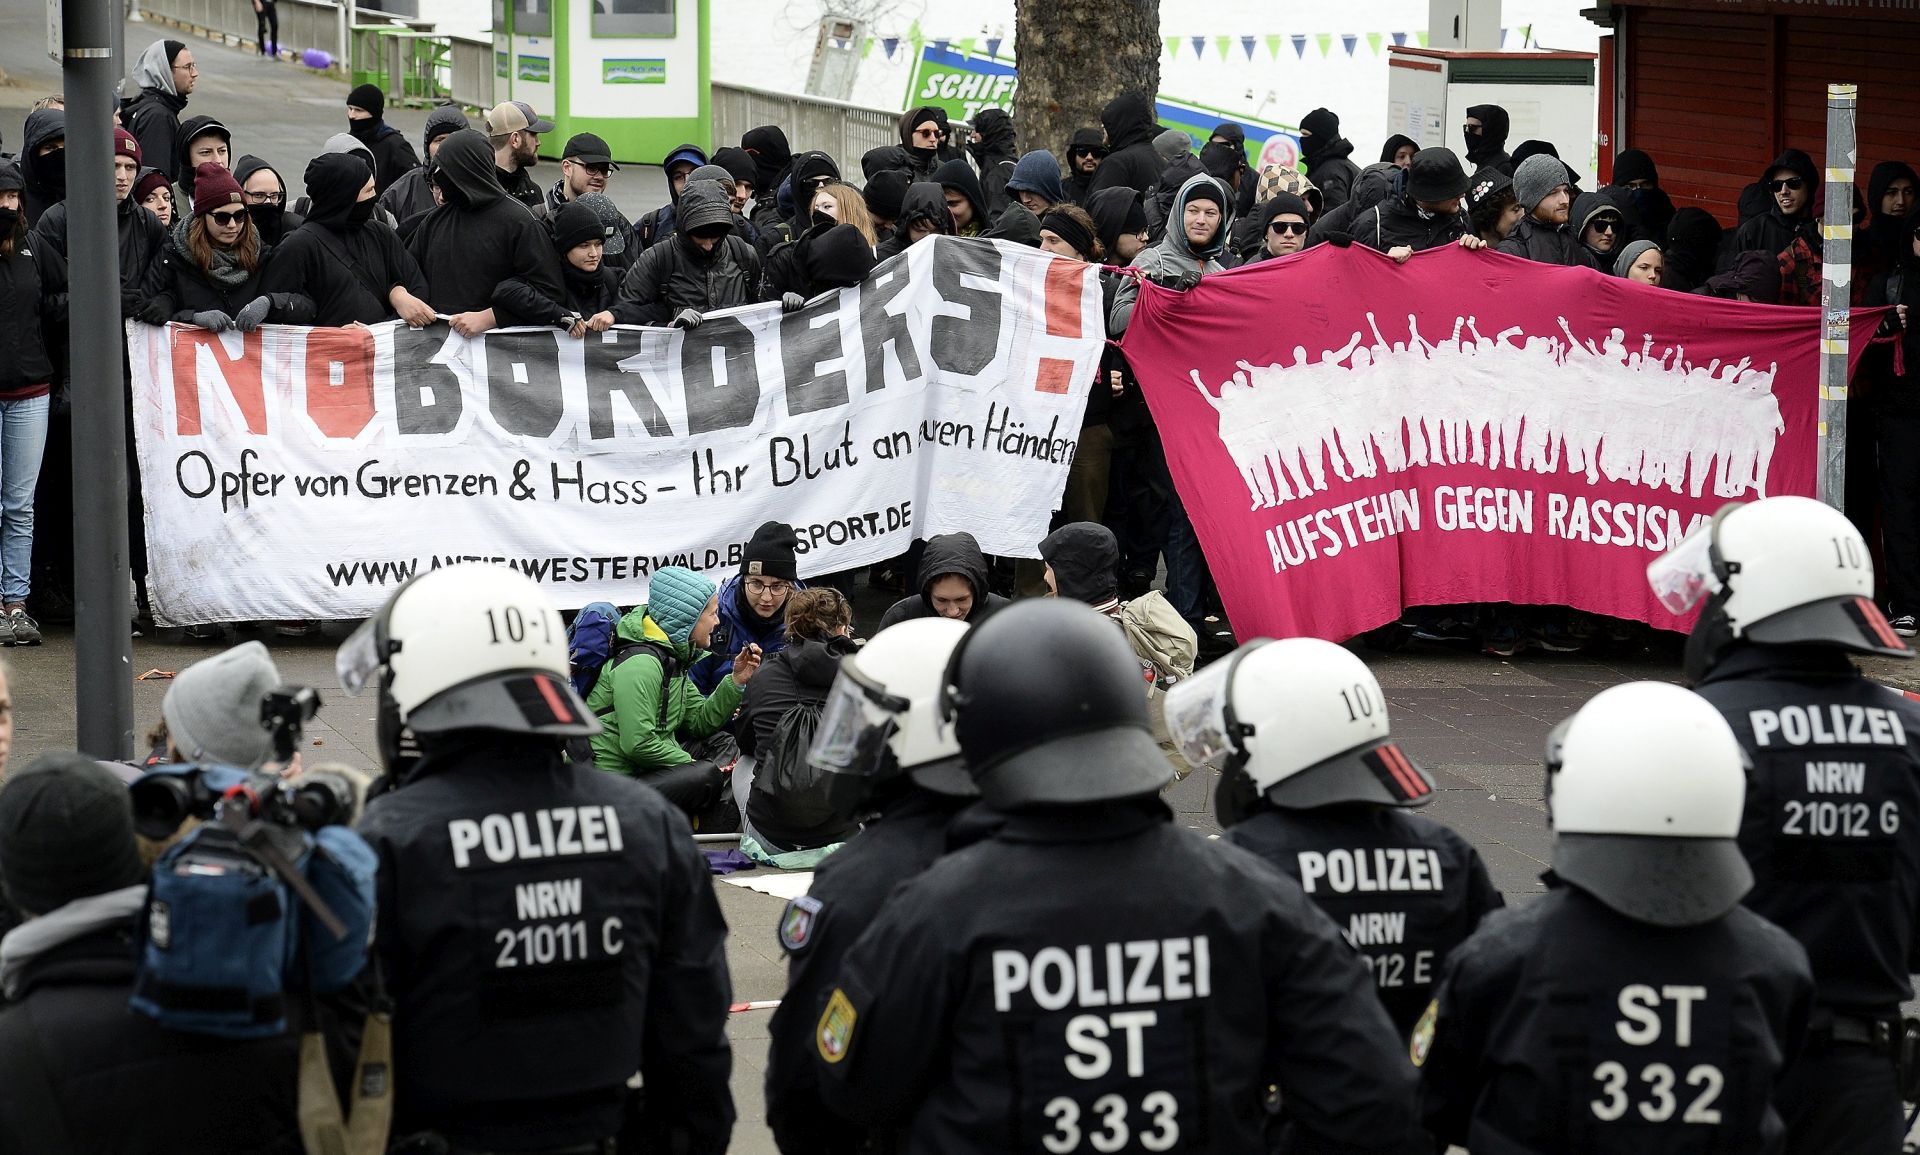 epa05920582 German police in riot gear face protesters of a rally against the 'Alternative for Germany' (AfD) party conference in Cologne, Germany, 22 April 2017. Germany's right-wing Alternative for Germany (AfD) party will gather at the Maritim Hotel Cologne for their federal convention on 22 and 23 April 2017. According to reports, some 50,000 people including thousands of left-wing demonstrators take part in the protest aimed at massively disturbing or even shutting down the AfD's convention.  EPA/SASCHA STEINBACH